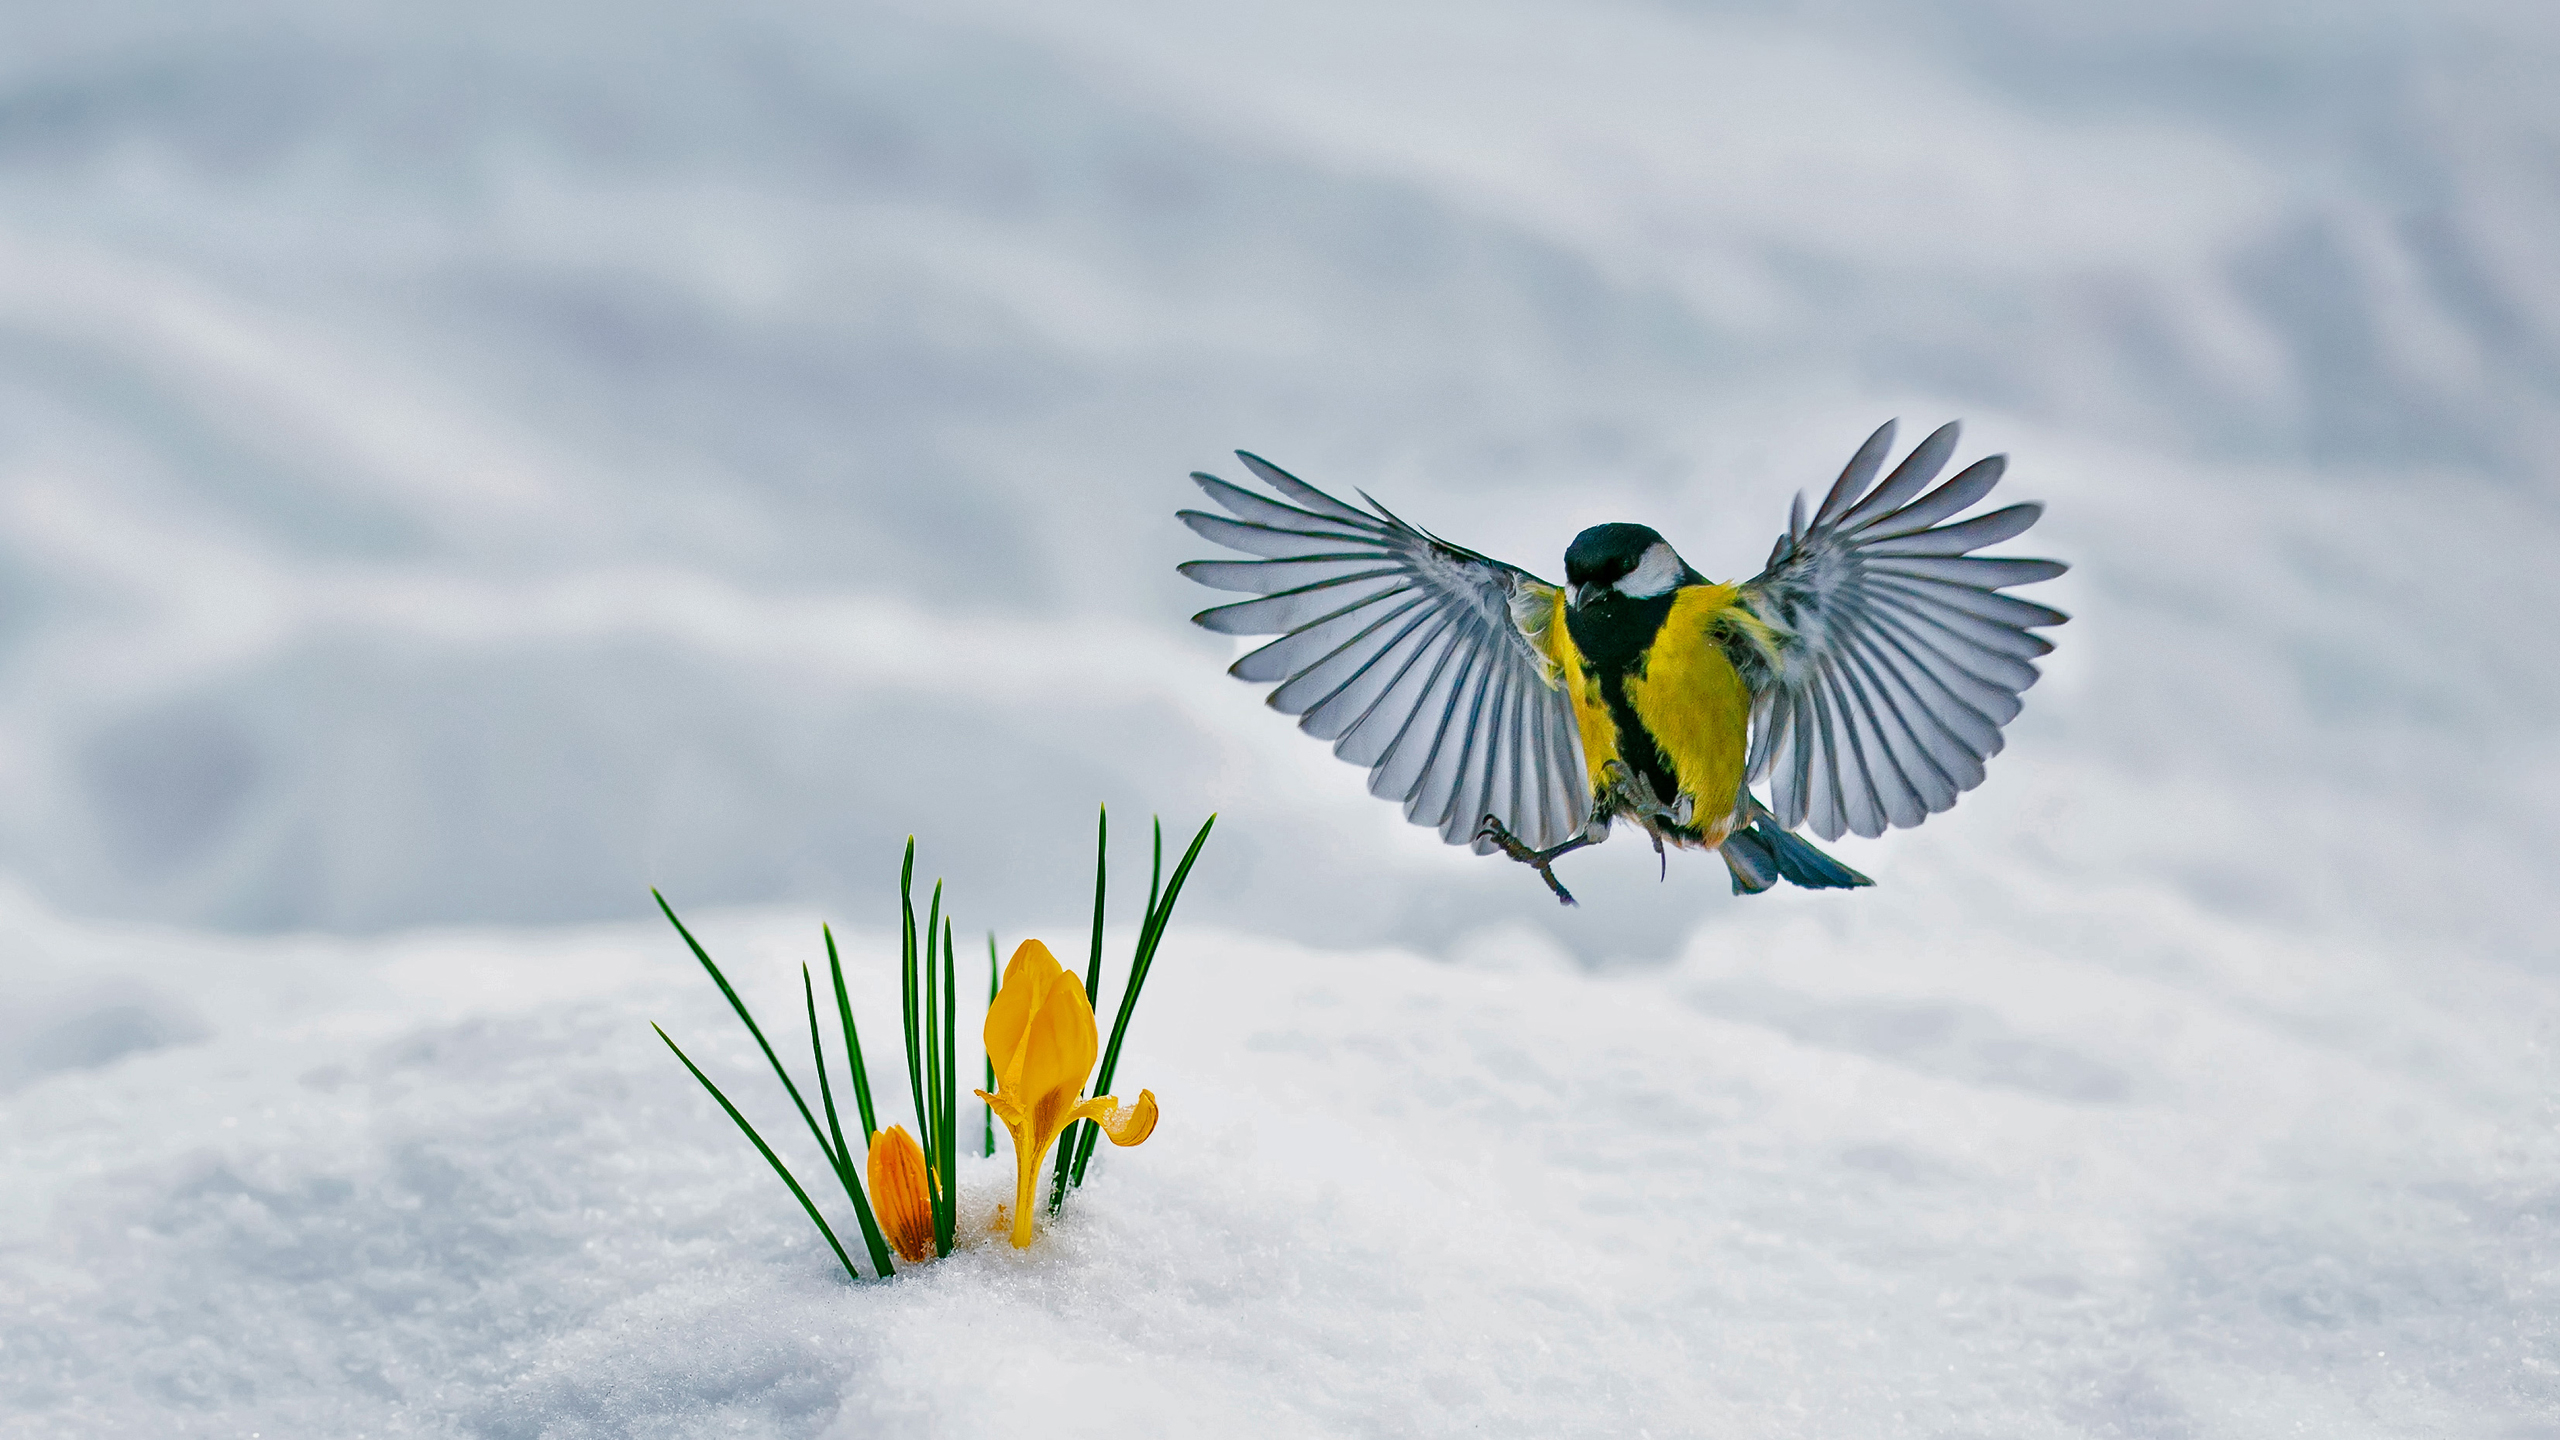 A tit flies to a flower sticking out of the snow.